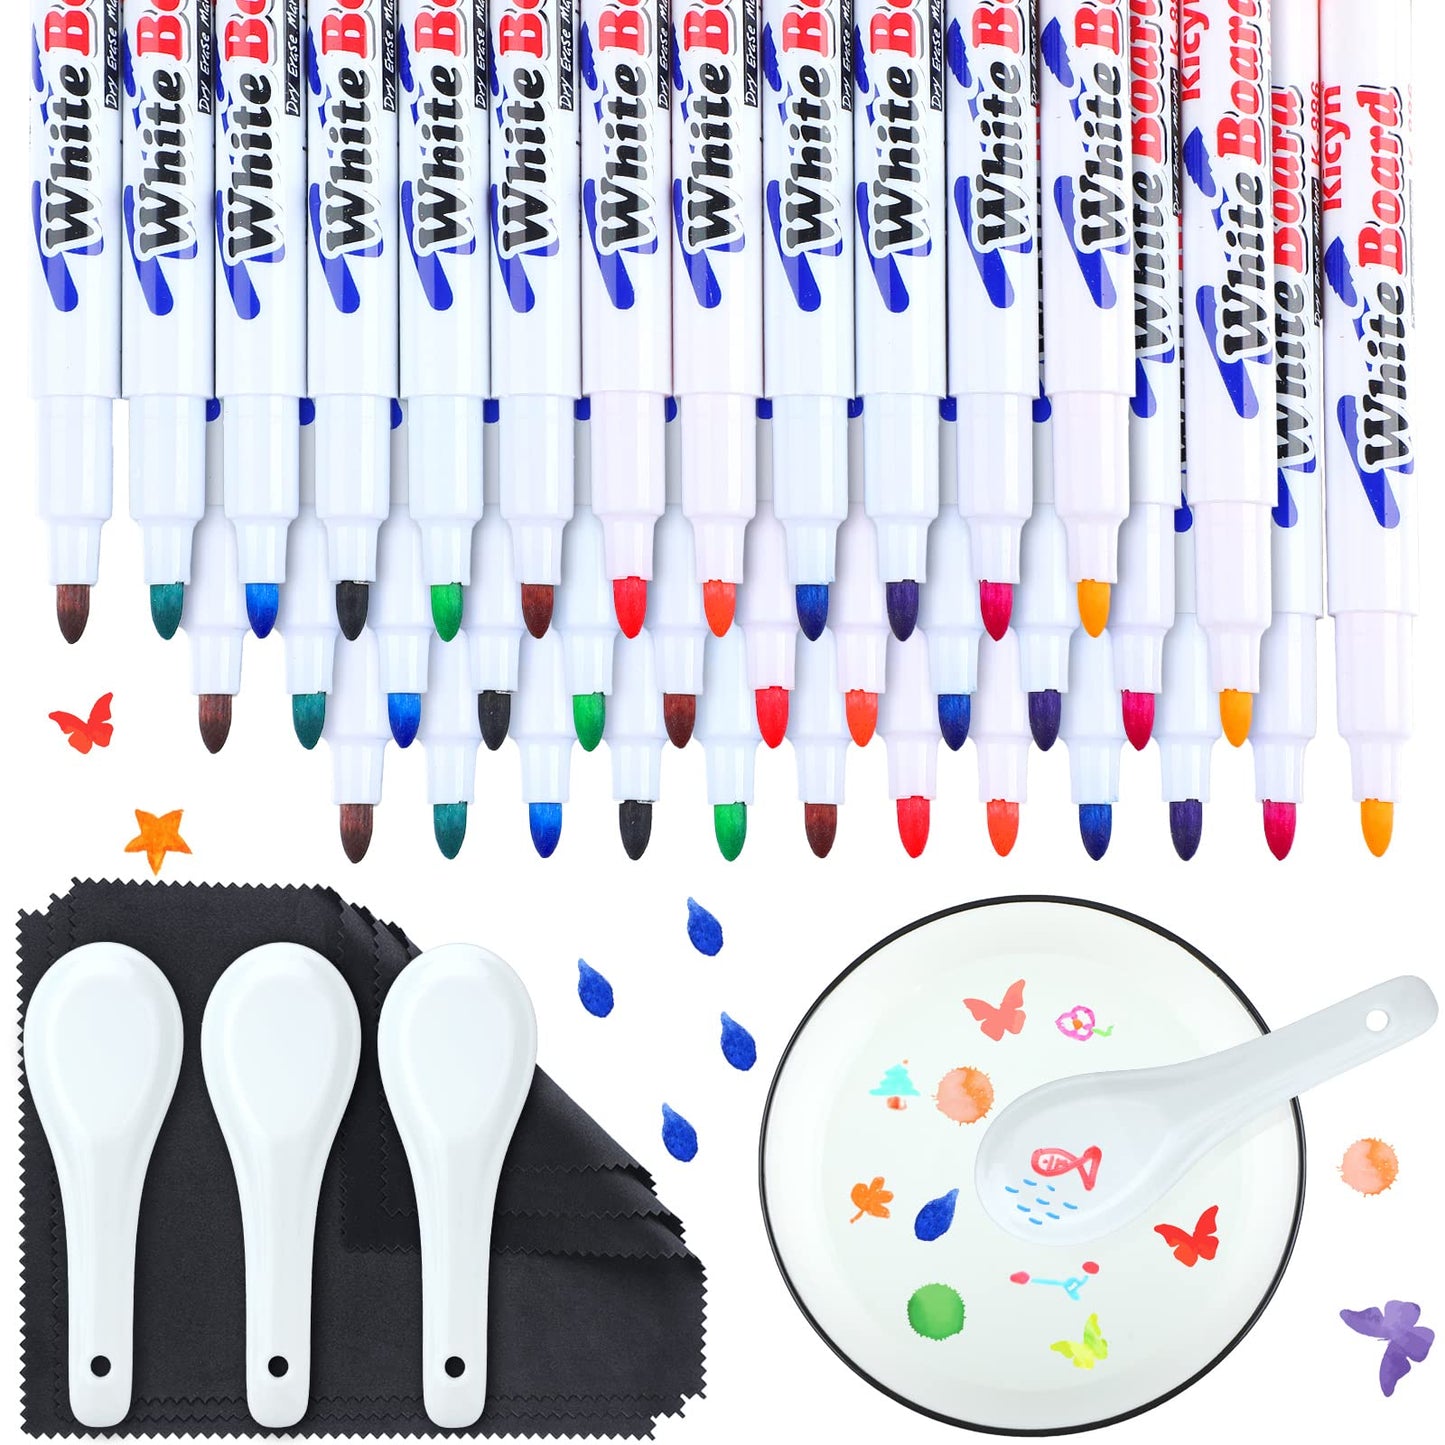 Magical Water Painting Pen, Magic Doodle Drawing Pens, Doodle Water  Floating Painting Marker Pens for Kids Adult Drawing Gift